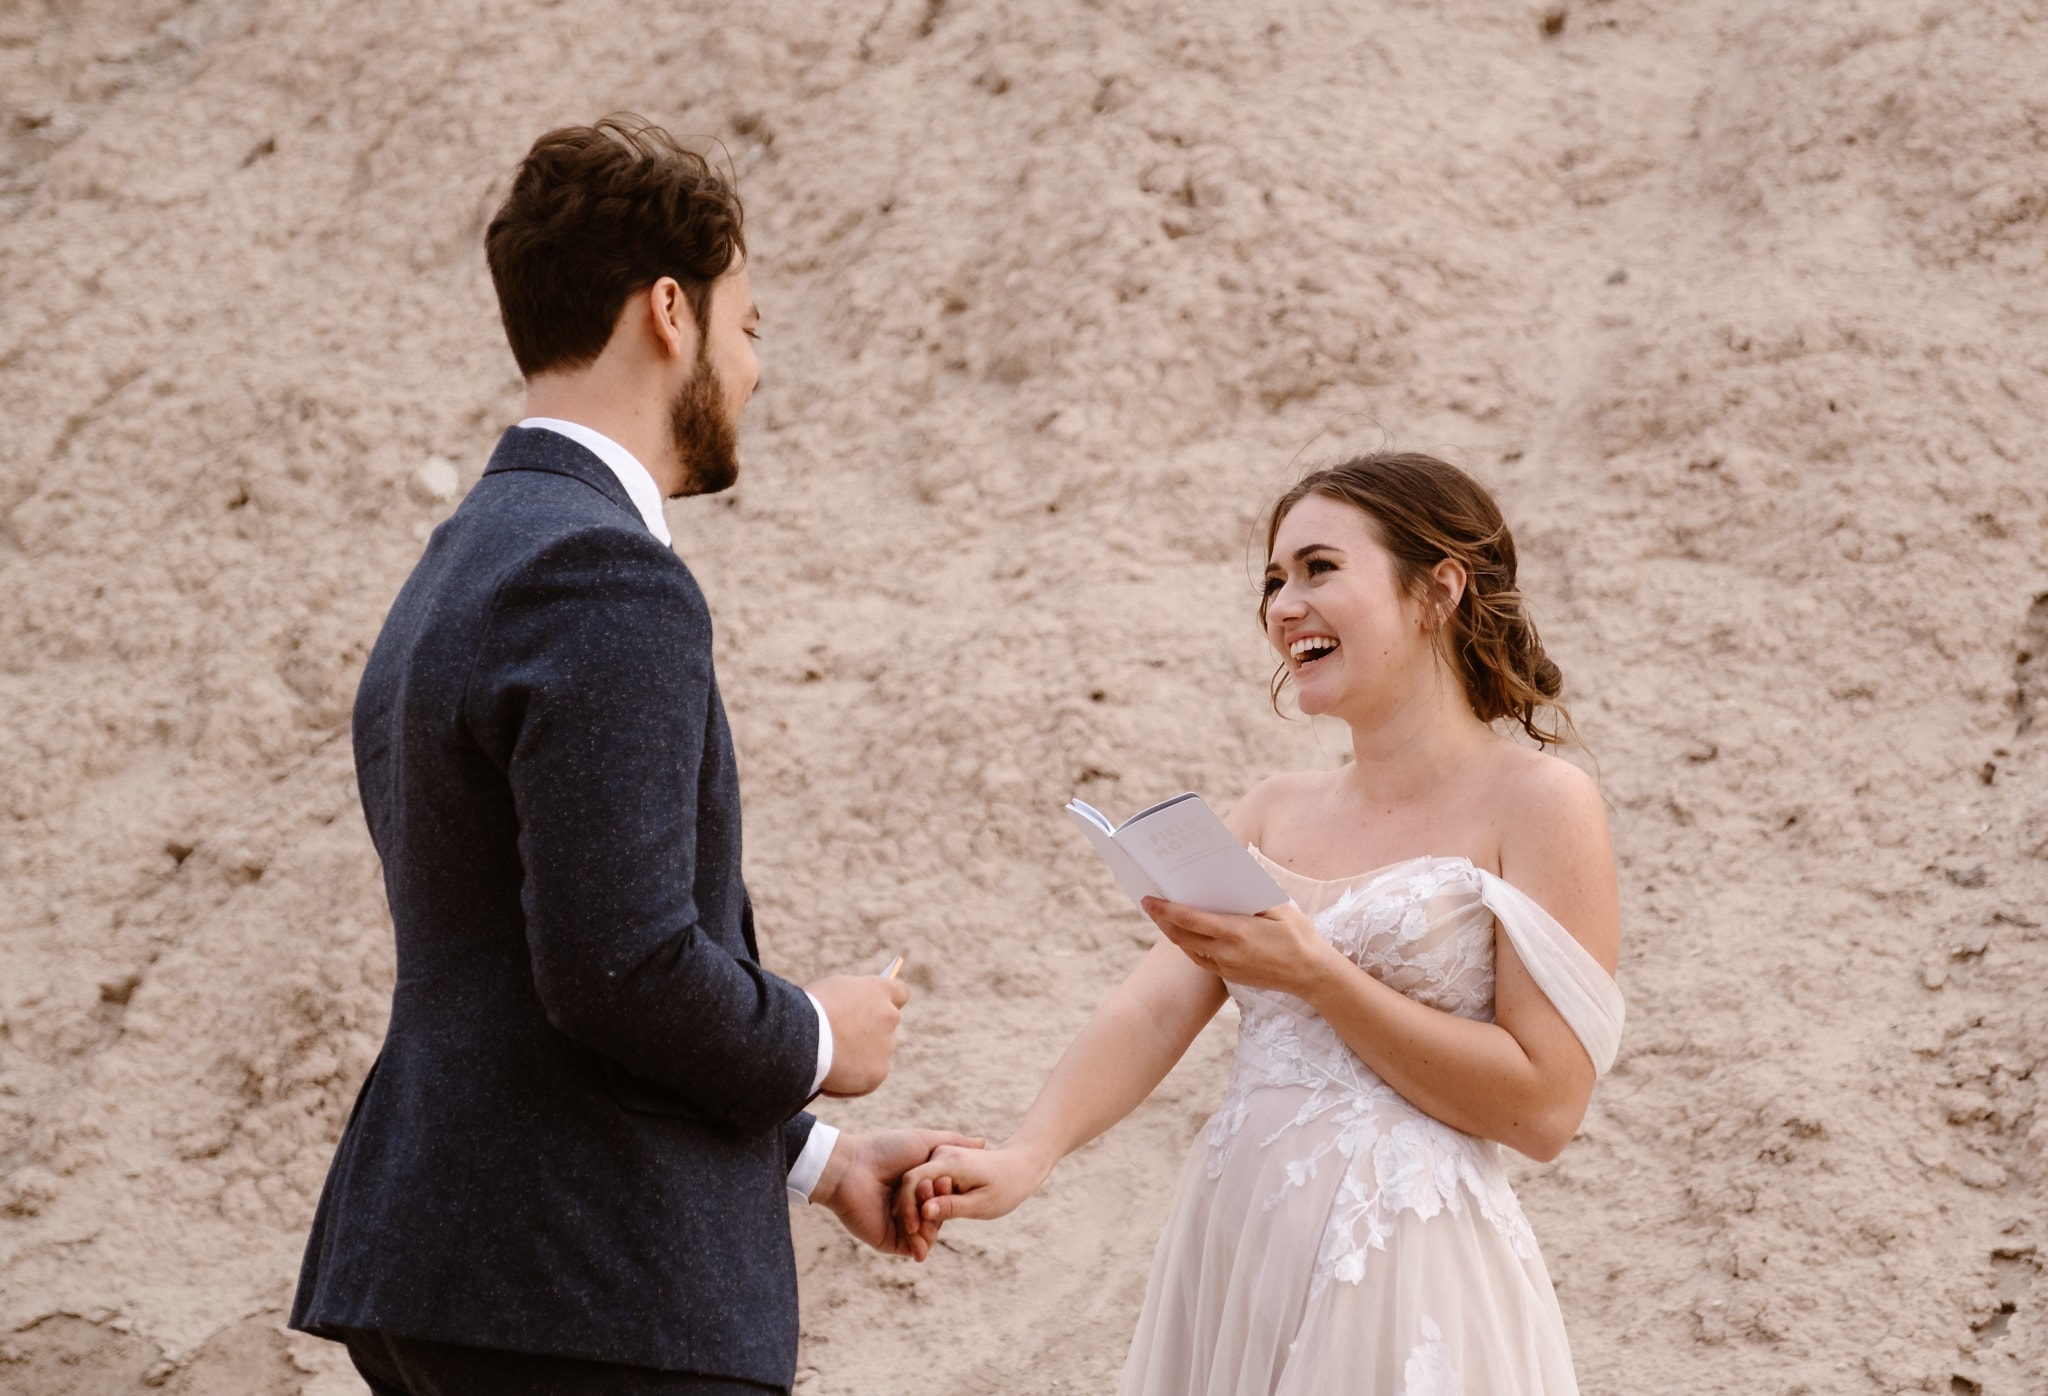 A person in a suit faces a smiling bride holding a vow book, both standing in front of a textured sandy hill.